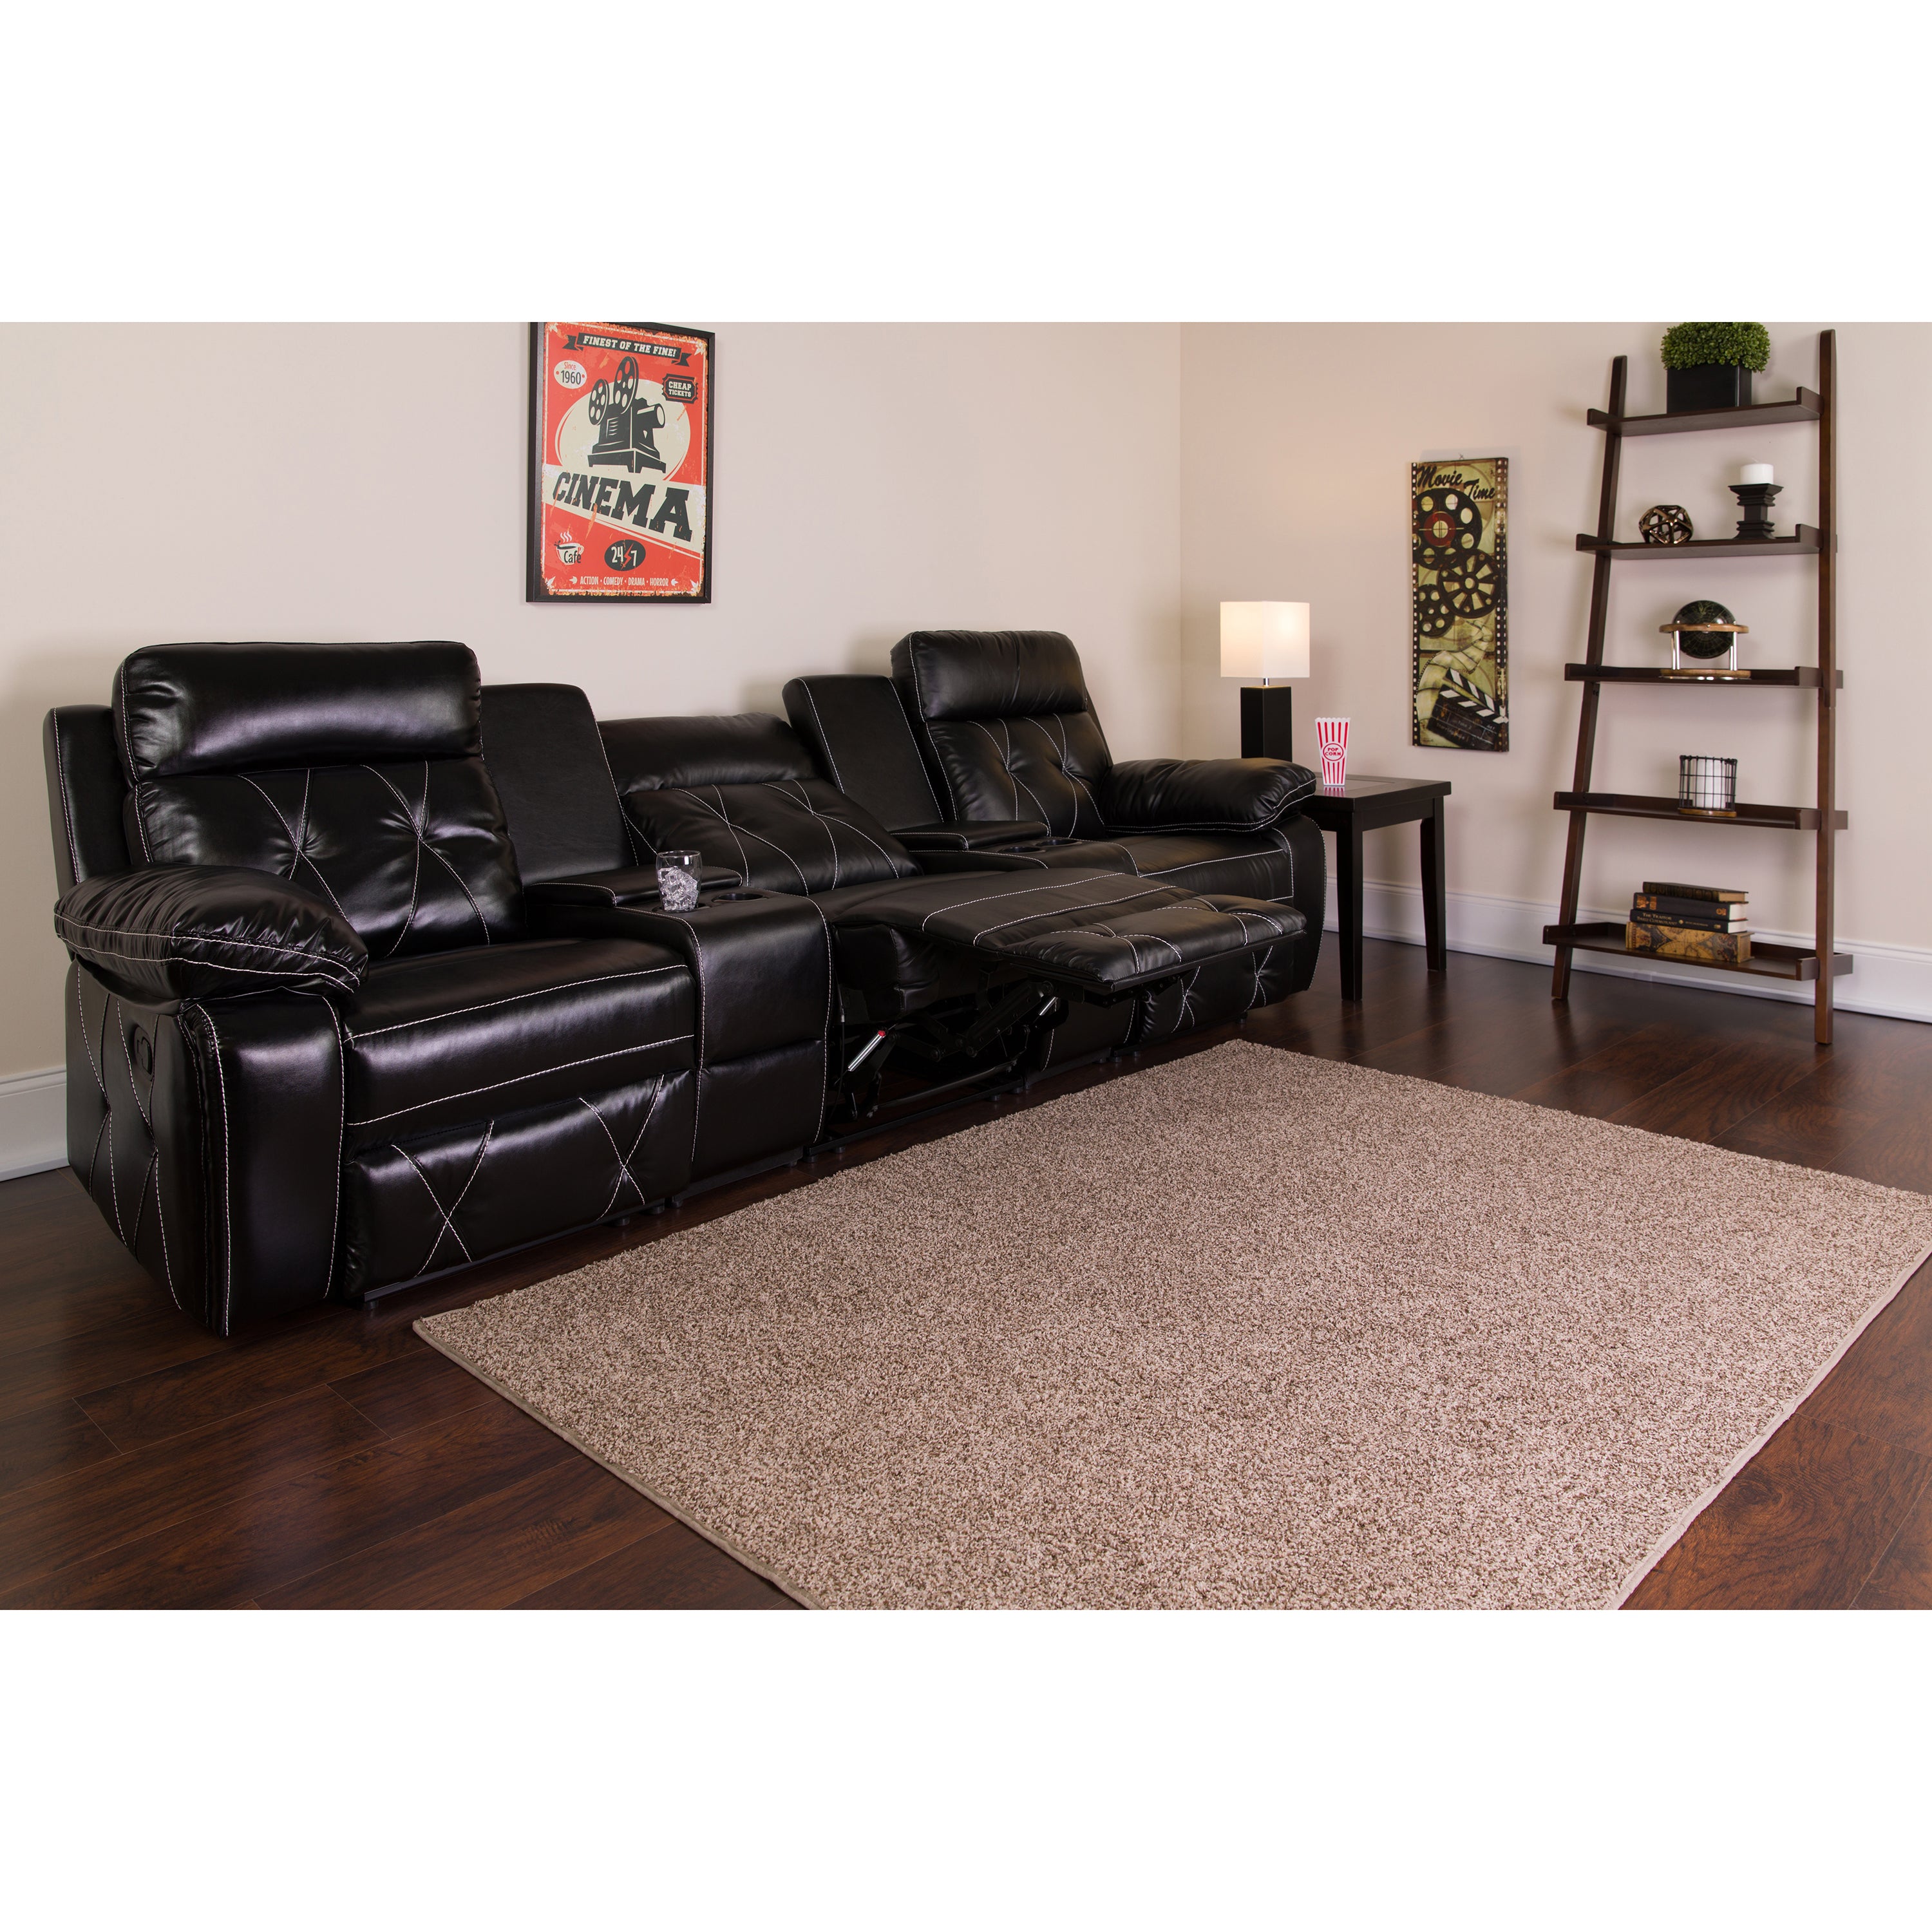 Reel Comfort Series 3-Seat Reclining LeatherSoft Theater Seating Unit with Straight Cup Holders-Theater Seating-Flash Furniture-Wall2Wall Furnishings